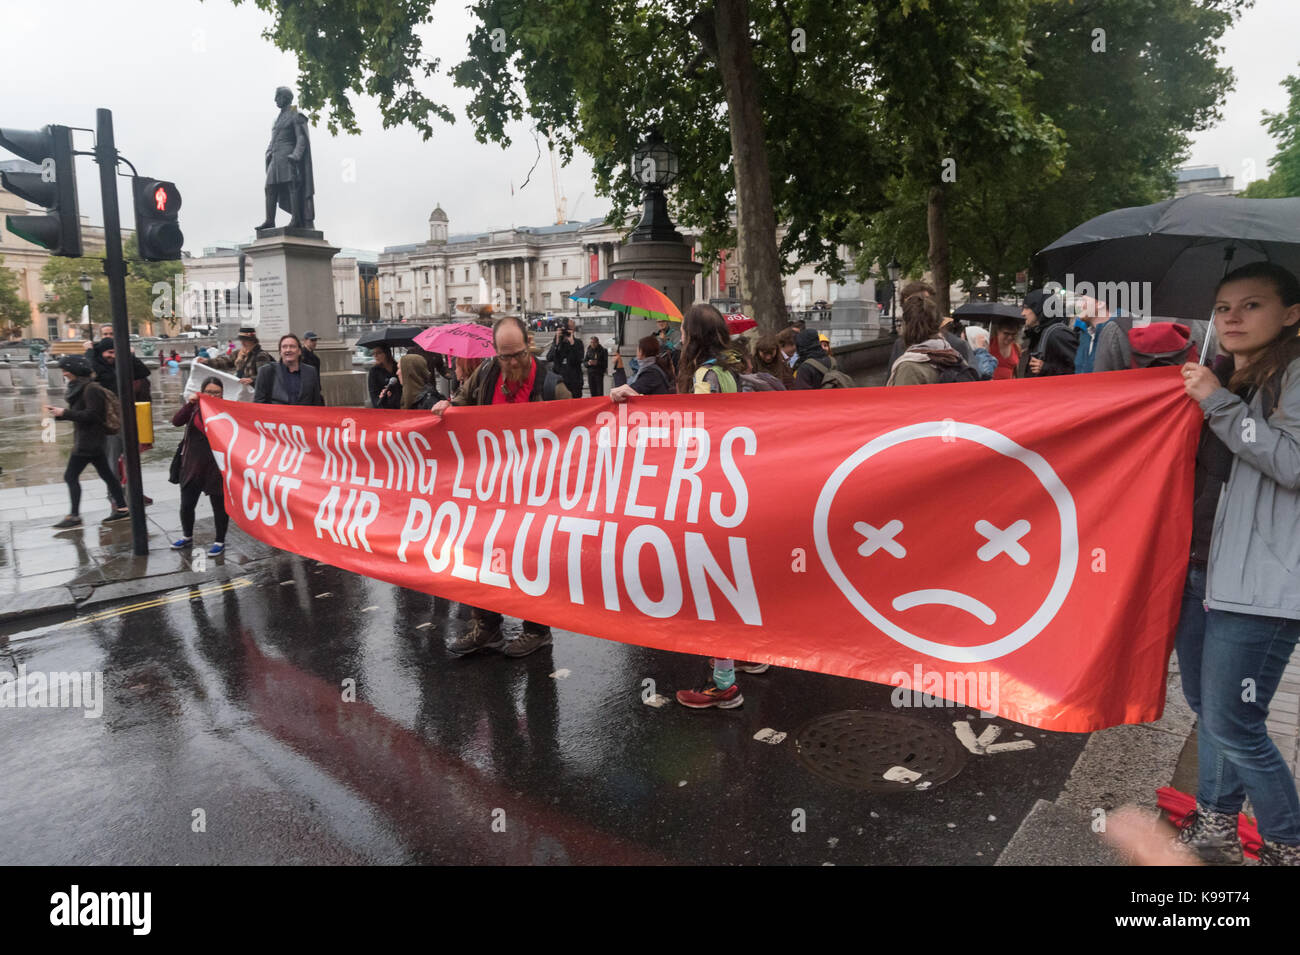 September 21, 2017 - London, UK - London, UK. 21st September 2017. After successfully blocking all traffic in Trafalgar Square for a short protest and a few minutes rest, 'Stop Killing Londoners' block the east side of the square for a few minutes of disco protest, dancing to loud music on the roadway. Eventually police came and told them to leave and the protest ended. This was the 5th protest by campaigners from Rising Up aimed at mobilising people across London to demand action from the Mayor and TfL who are failing to confront this pressing problem. Boris laughed at the problem and Sadiq K Stock Photo